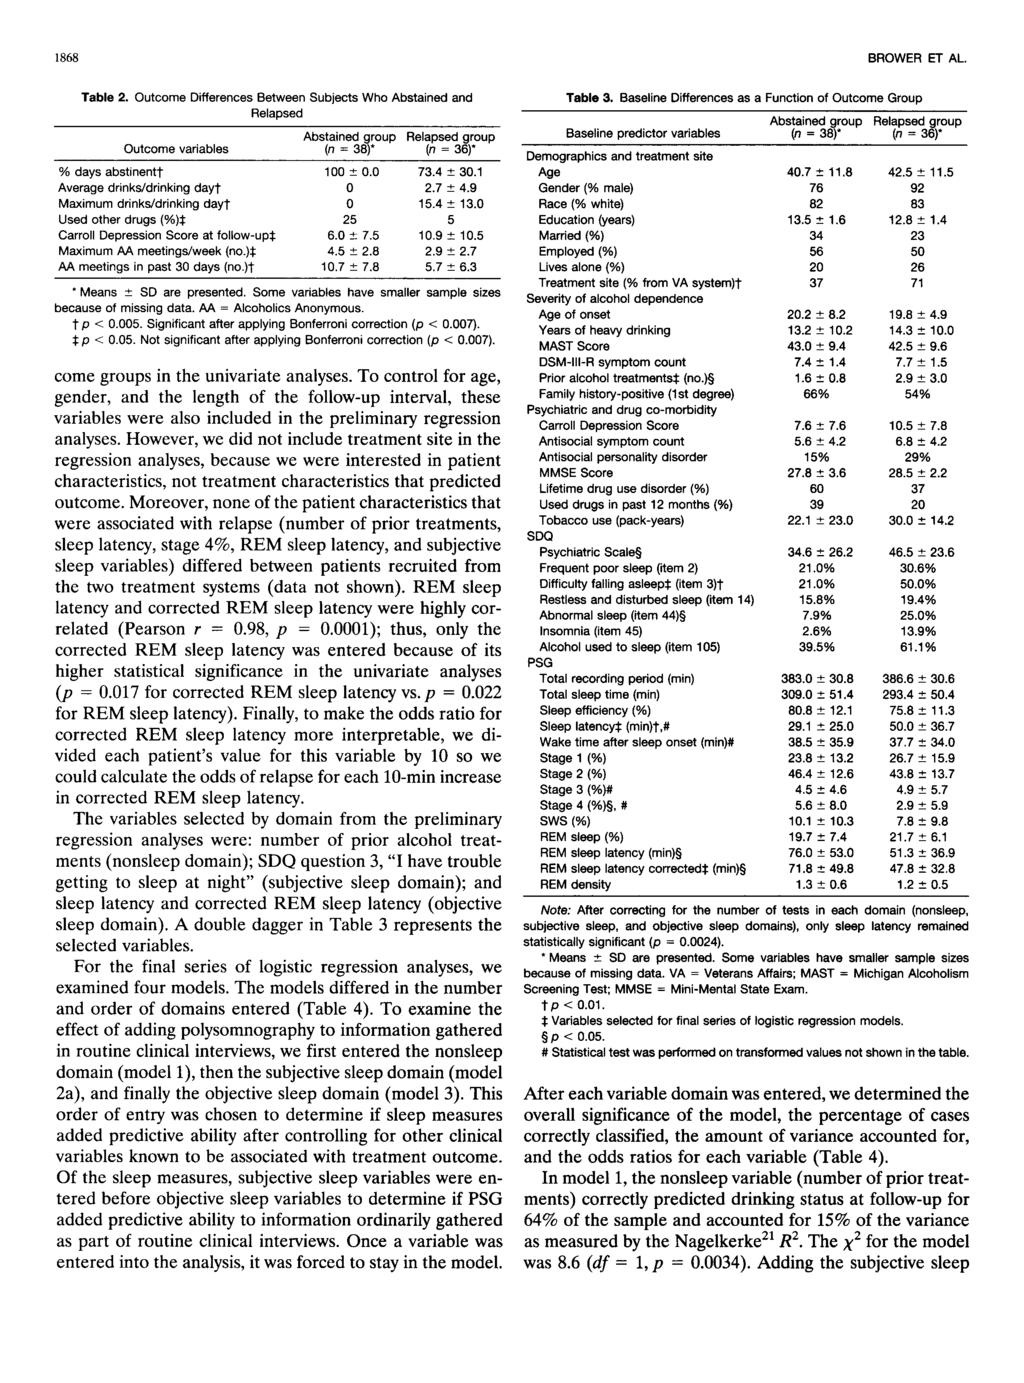 1868 BROWER ET AL. Table 2. Outcome Differences Between Subjects Who Abstained and Relapsed Abstained group Relapsed group Outcome variables (n = 38) (n = 36) % days abstinentt 100 t 0.0 73.4 t 30.